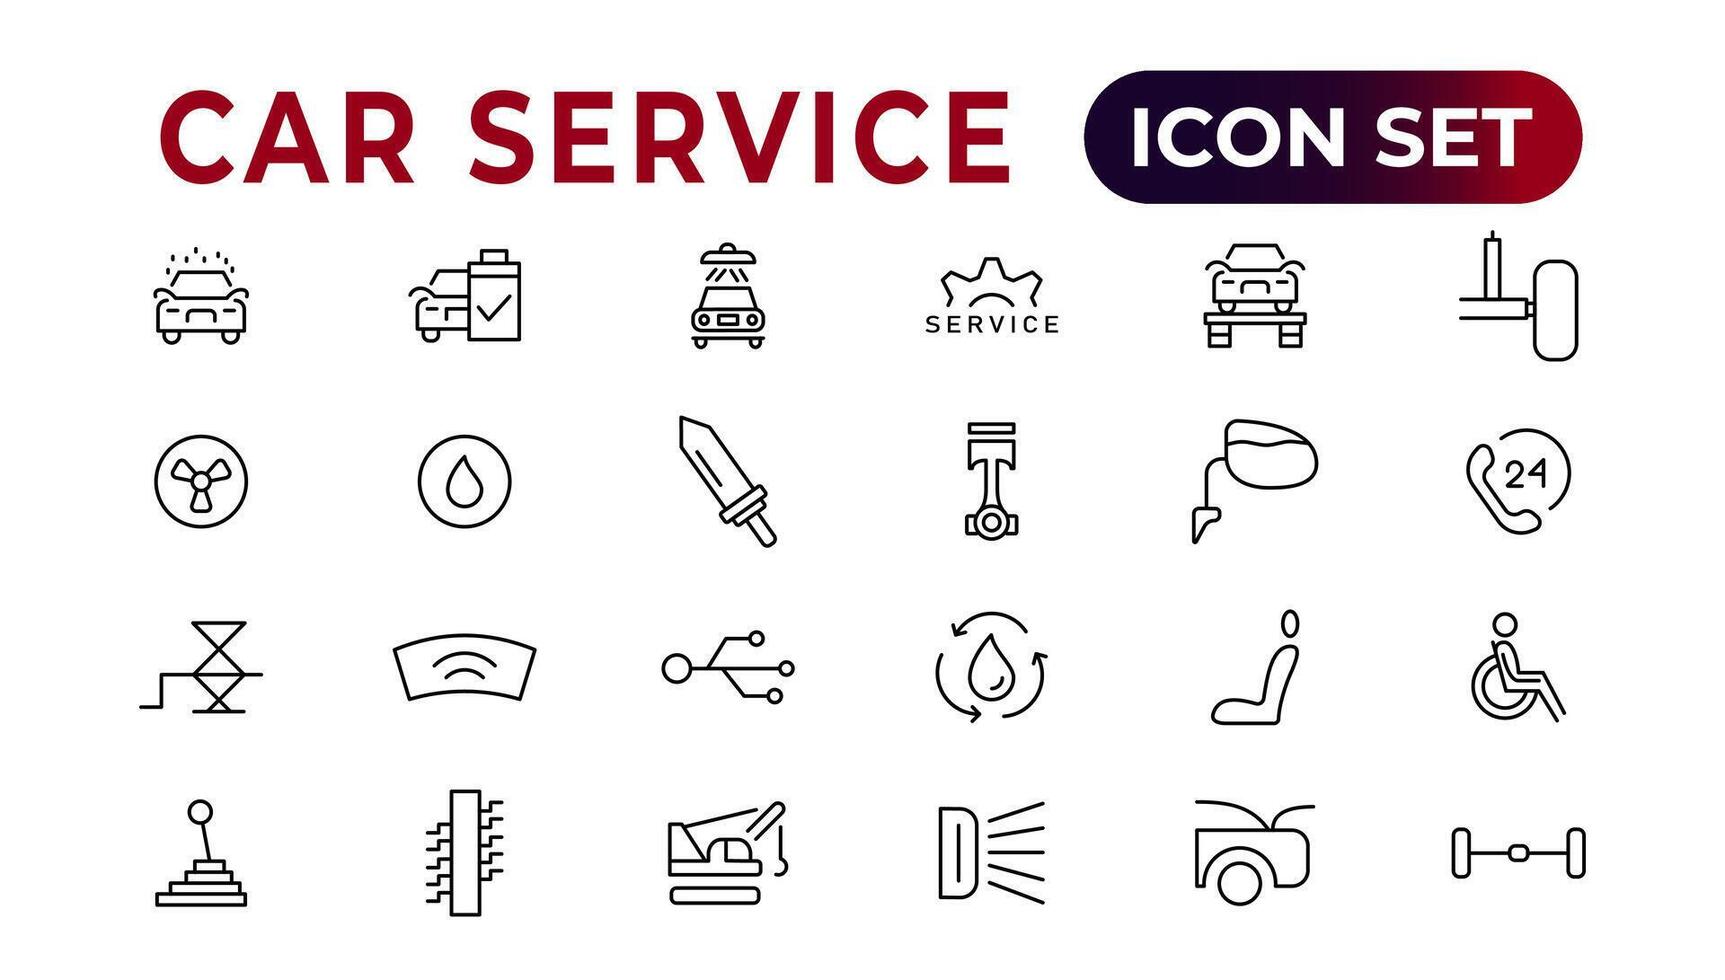 Car service icon set with editable stroke and white background. Auto service, car repair icon set. Car service and garage. vector